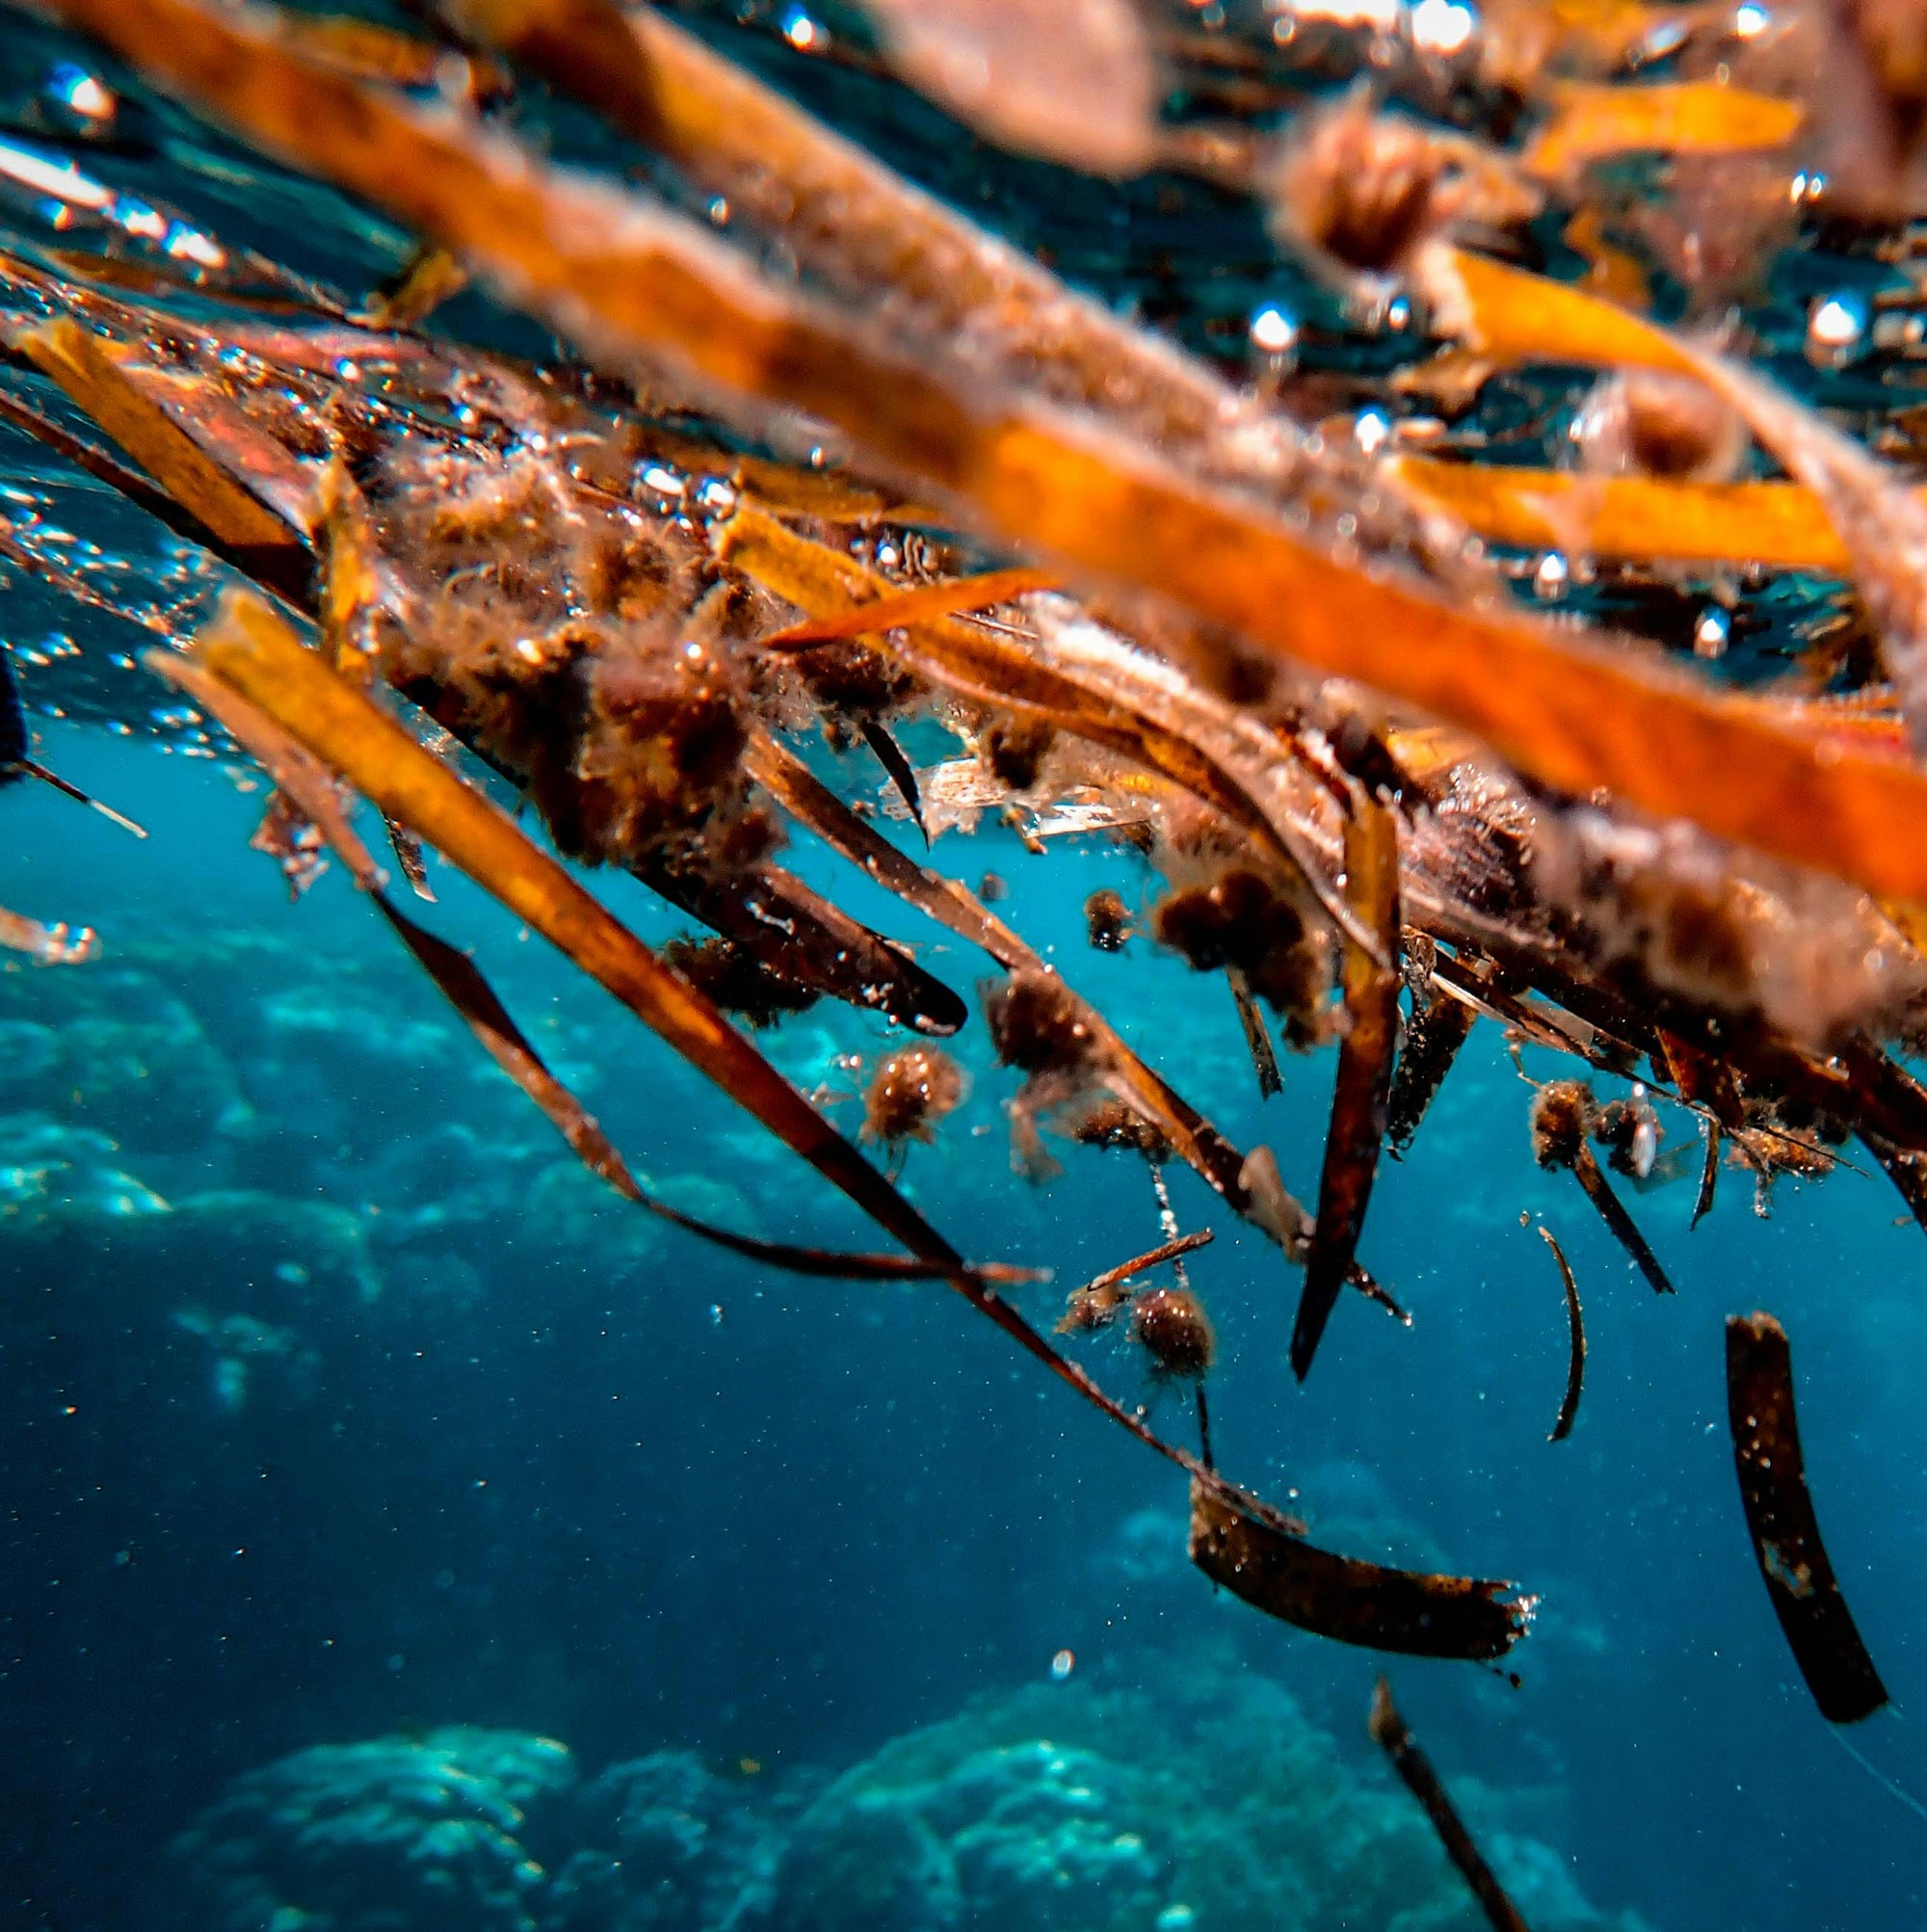 An underwater view showing brown seaweed and algae strands floating near the surface of a vibrant blue ocean. The sunlight filters through, illuminating the marine water and the diverse underwater scene below.